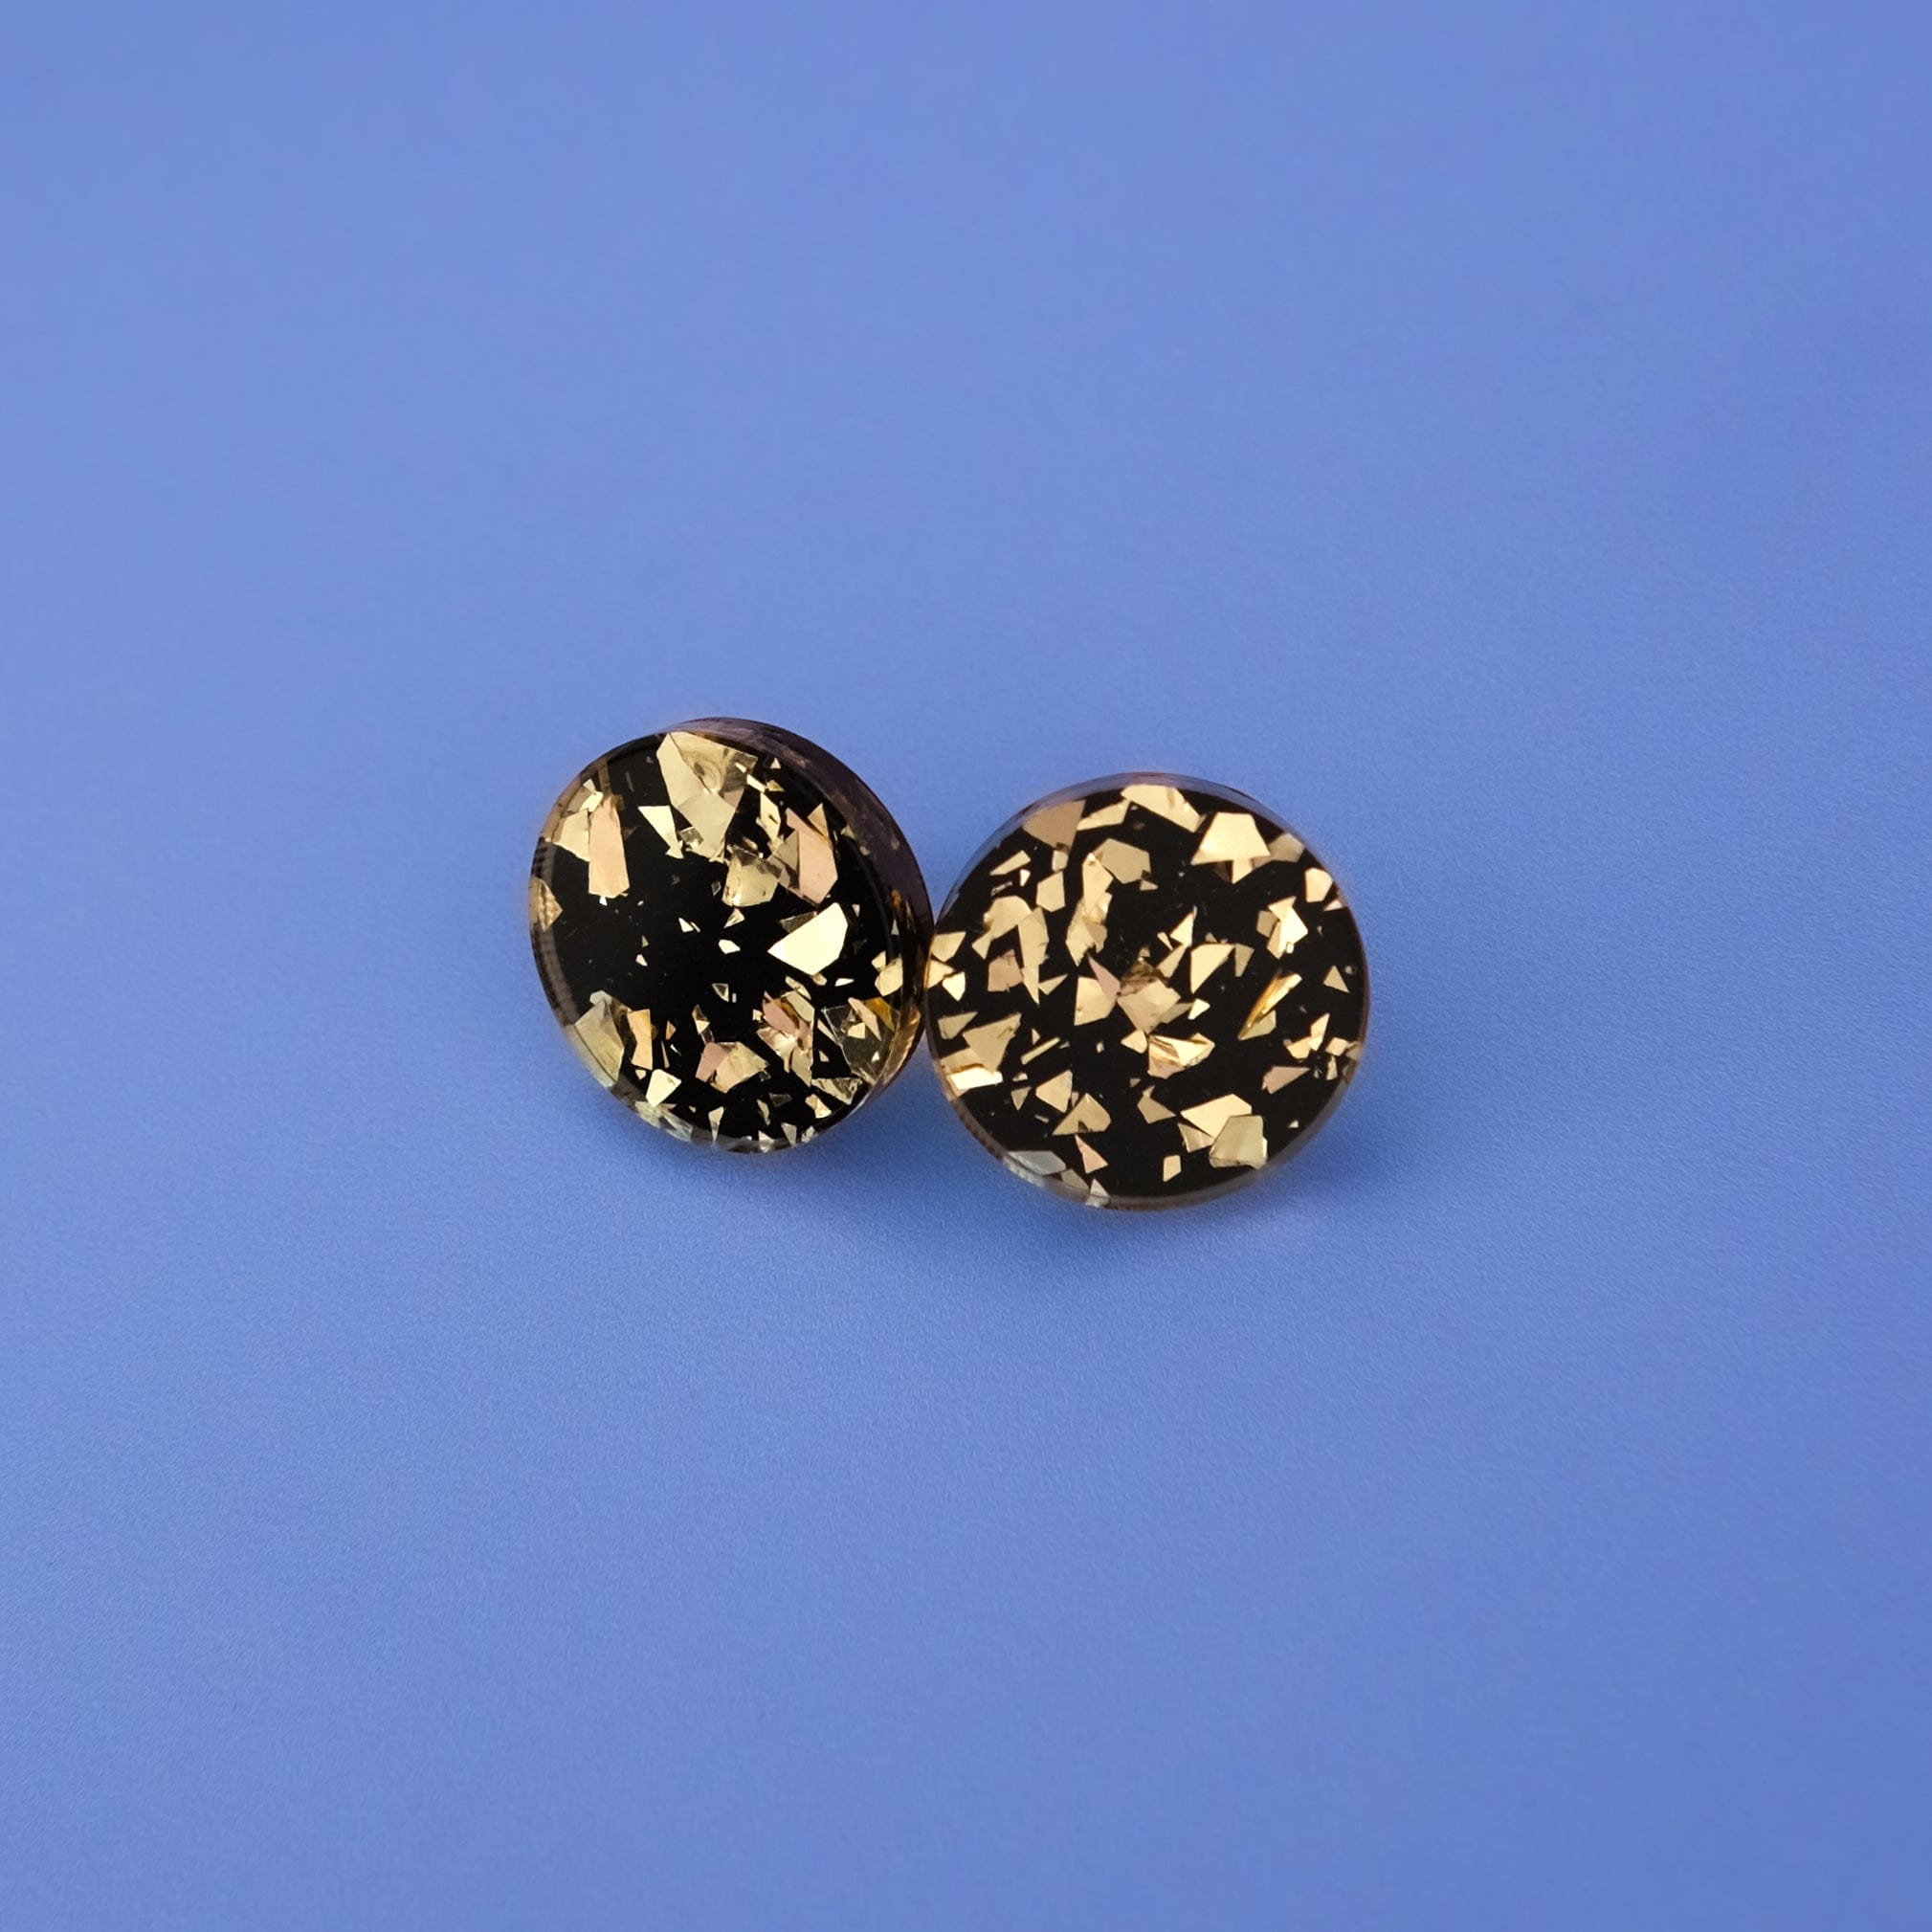 Glam and glitzy Black and Gold chunky glitter studs! 